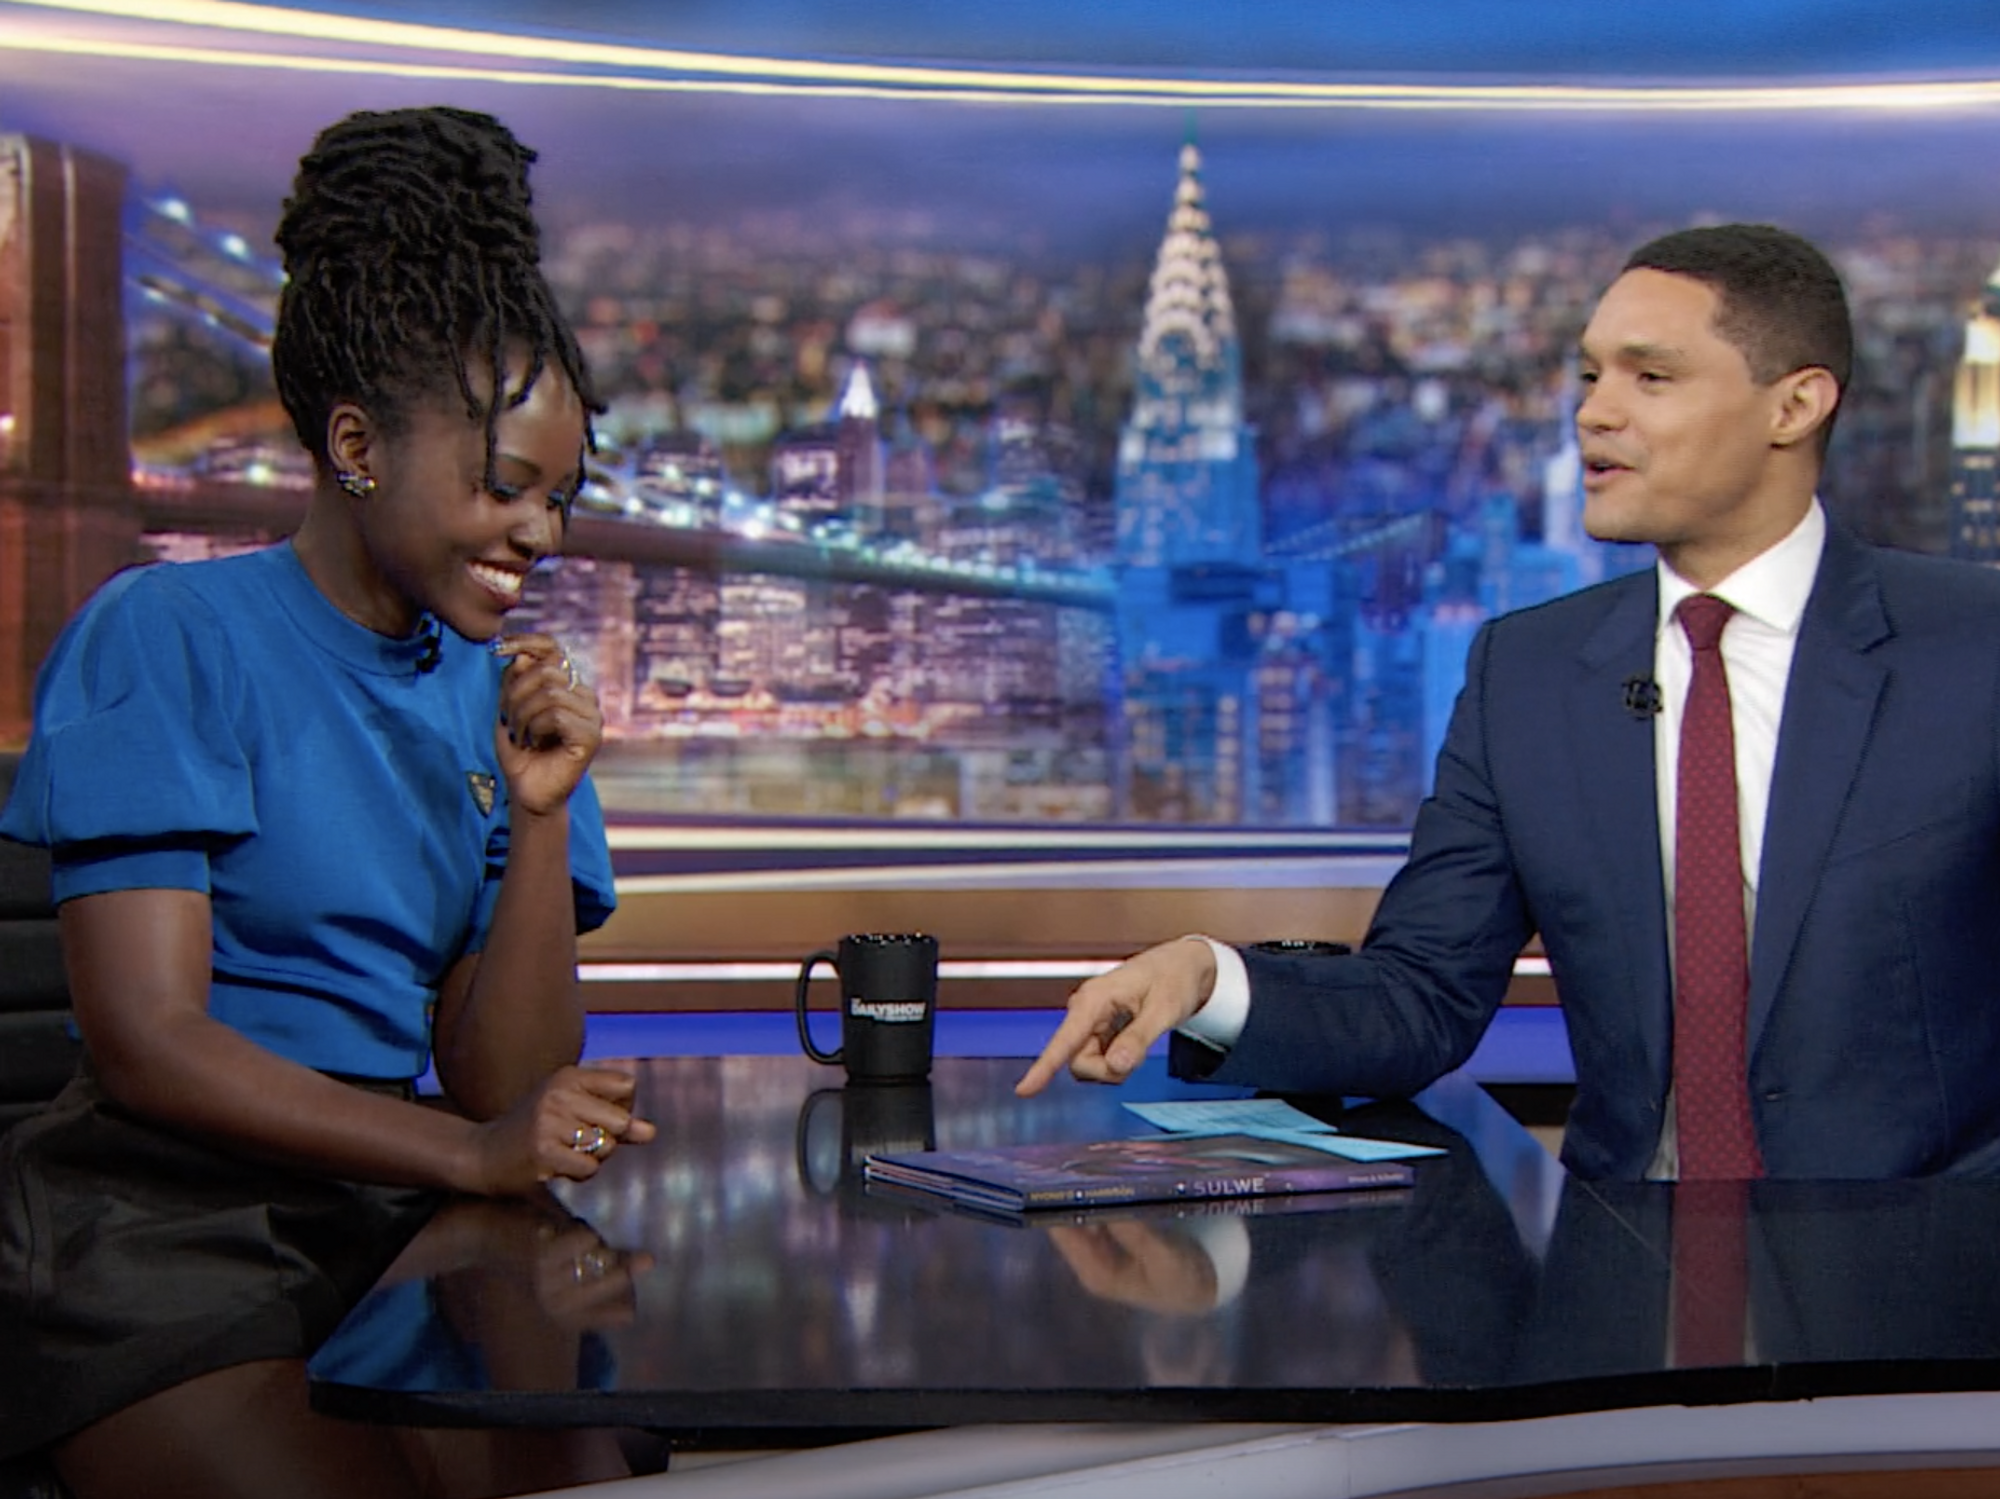  Lupita Nyong'o blue dress and Trevor Noah with suit